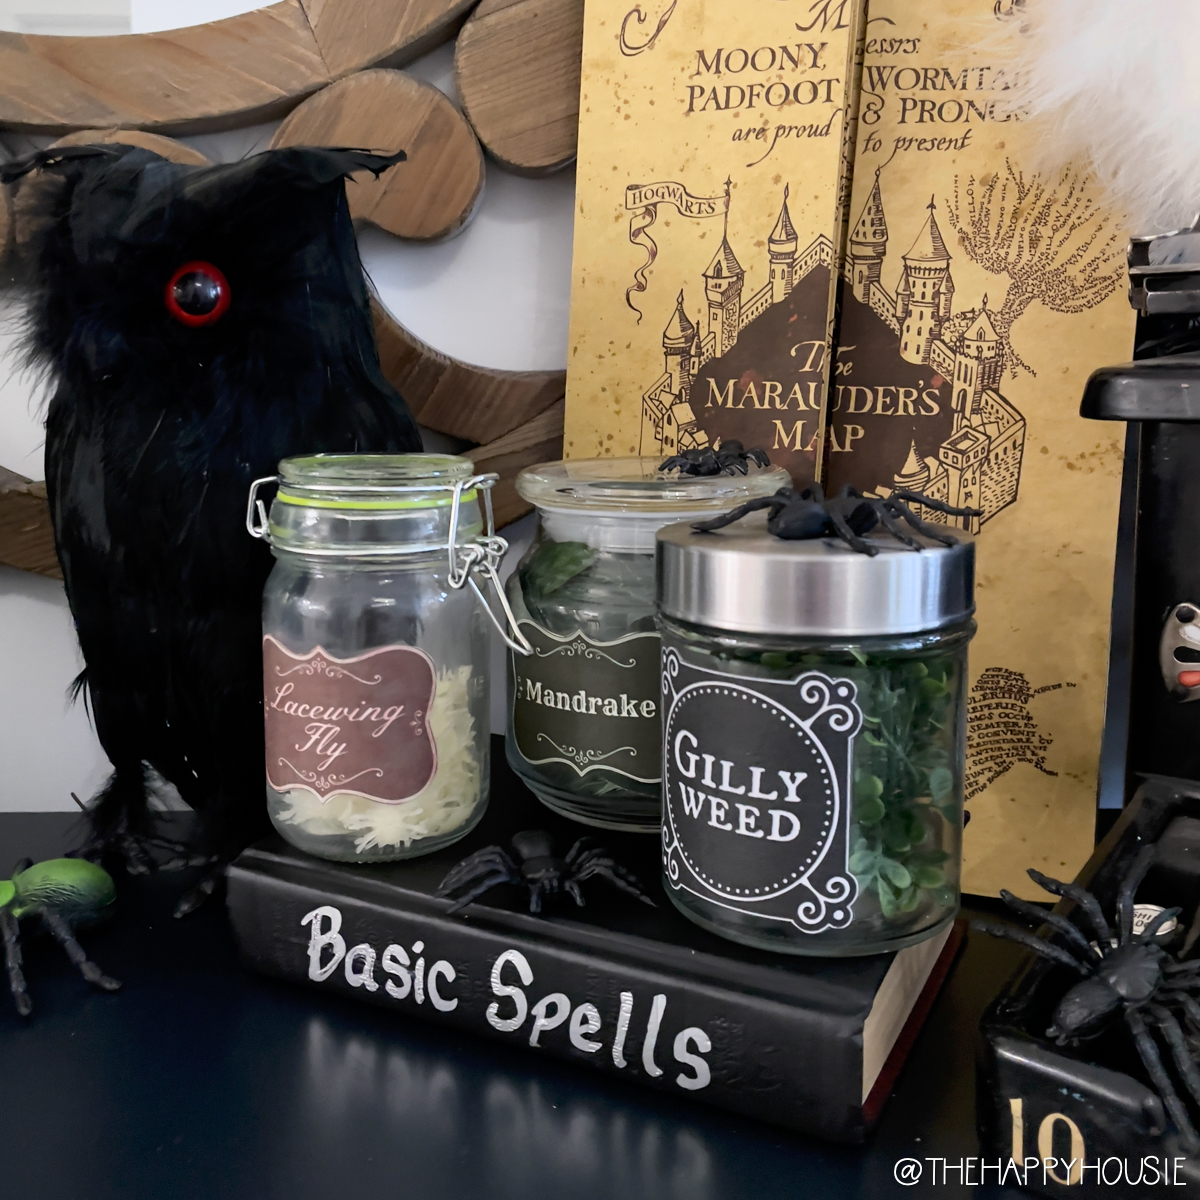 A book of basic spells has the jars sitting on top of it.